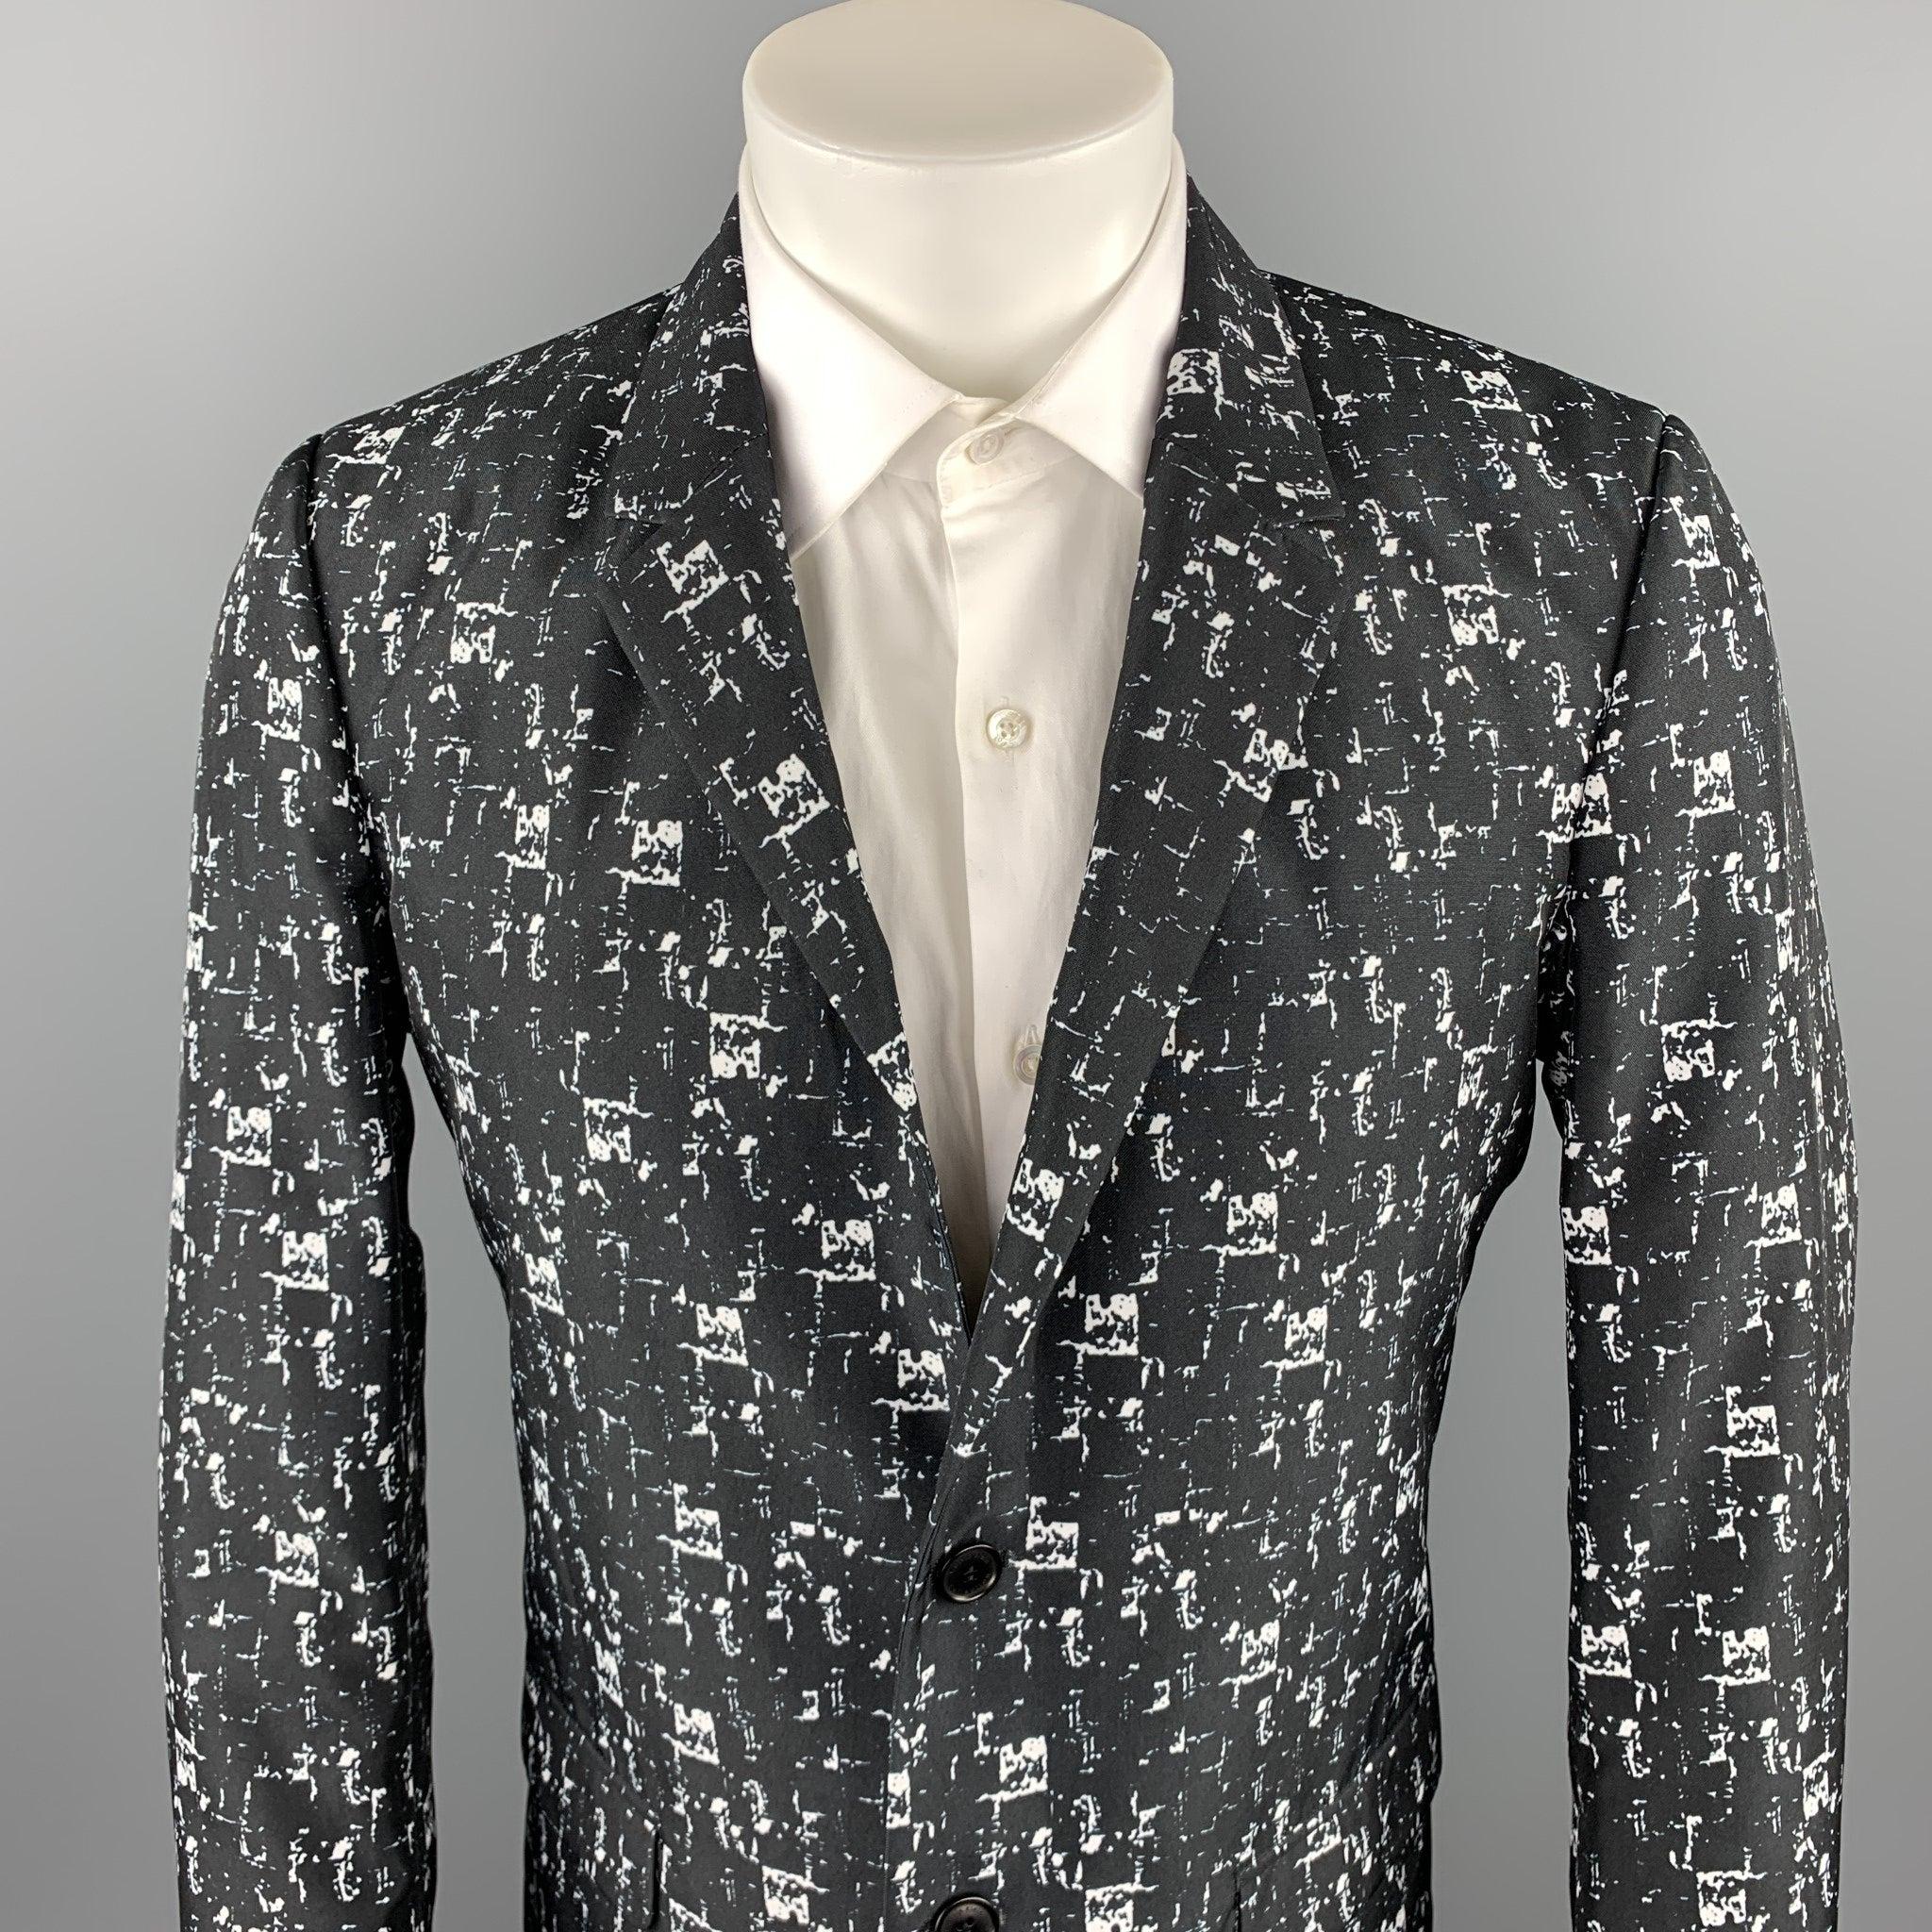 CALVIN KLEIN COLLECTION sport coat comes in a black & white print polyester with a full black liner featuring a notch lapel, flap pockets, and a two button closure.Excellent
Pre-Owned Condition. 

Marked:   48 / 38 

Measurements: 
 
Shoulder: 17.5